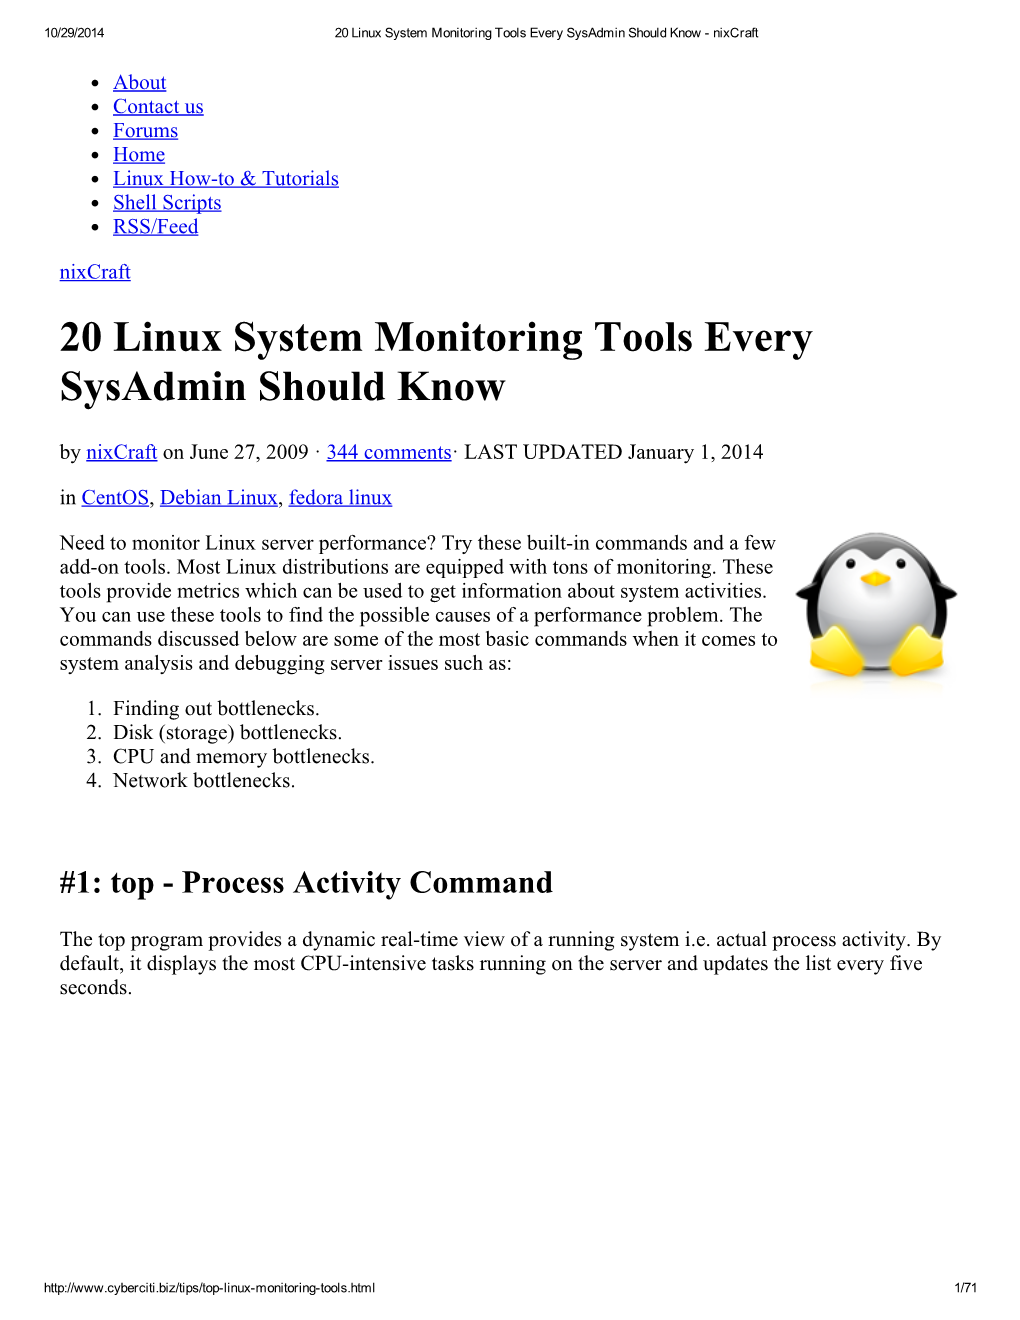 20 Linux System Monitoring Tools Every Sysadmin Should Know - Nixcraft